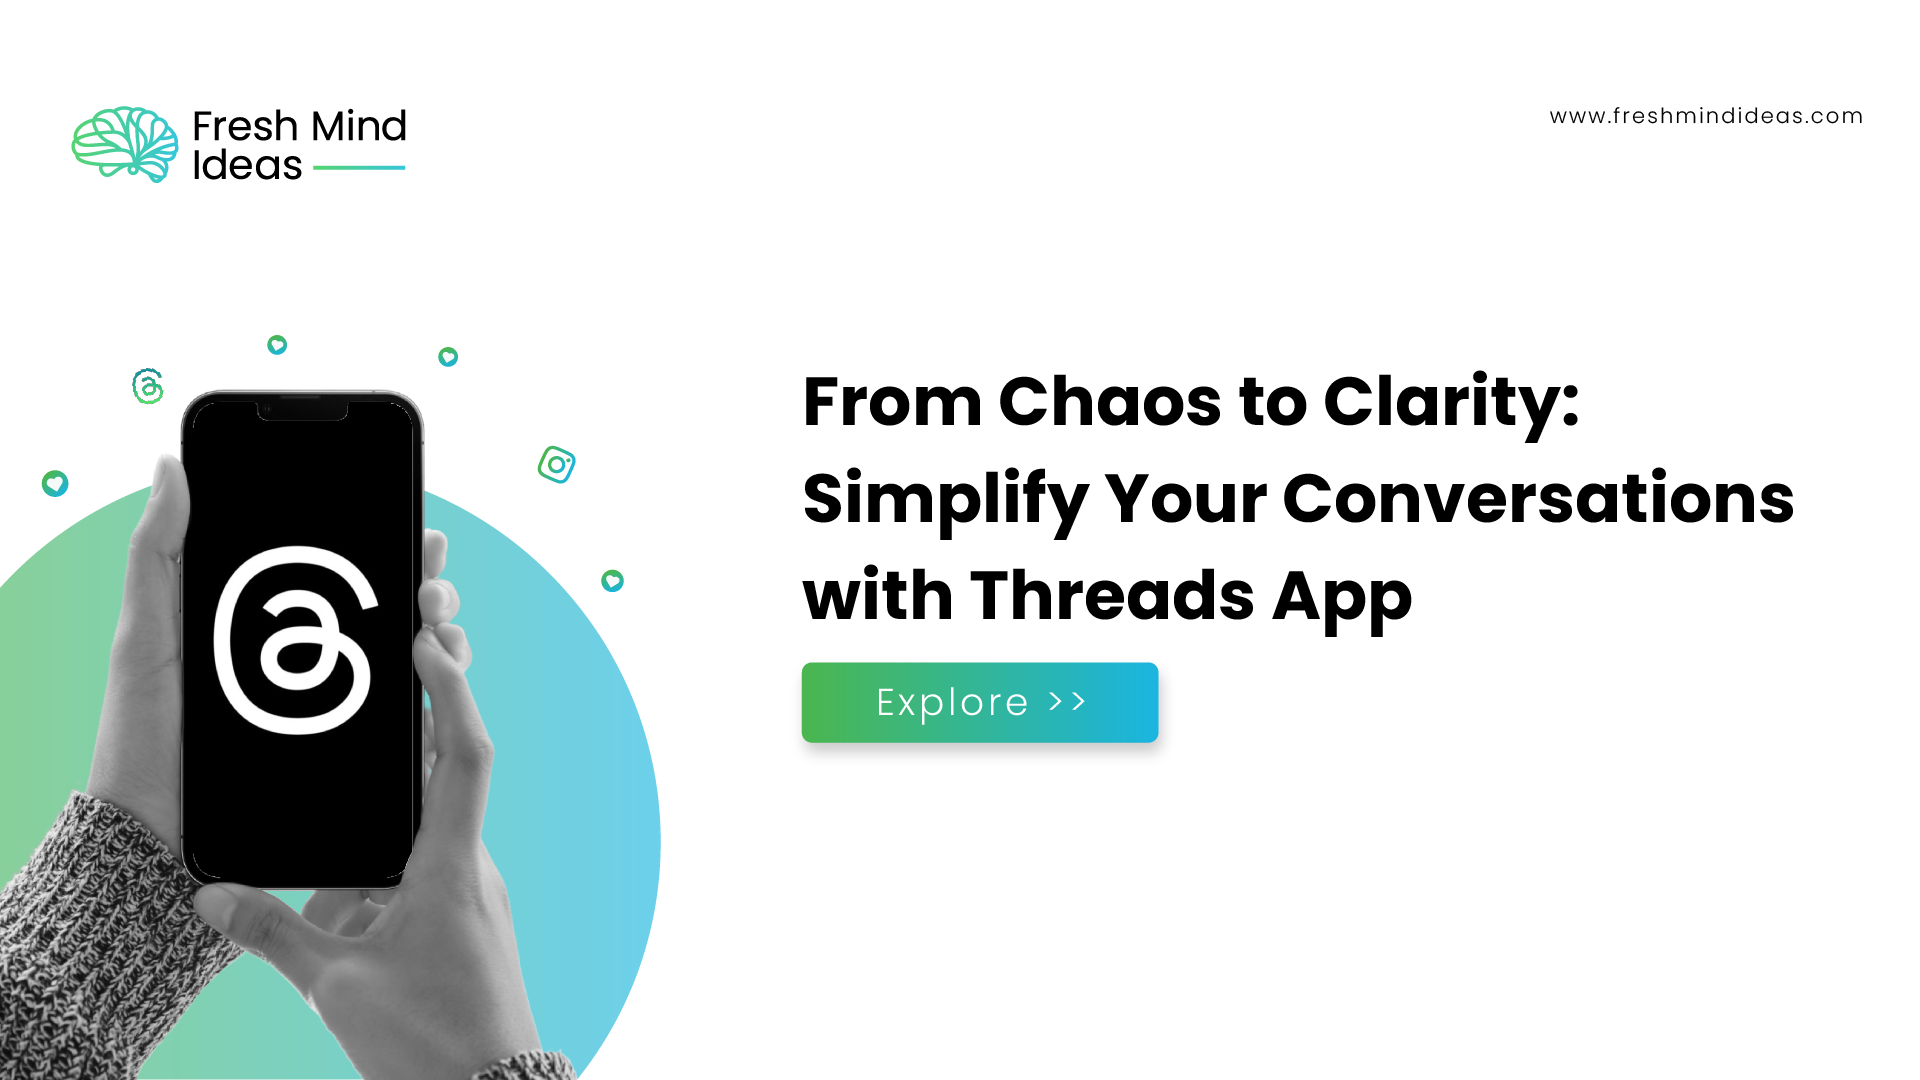 From Chaos to Clarity: Simplify Your Conversations with Threads App